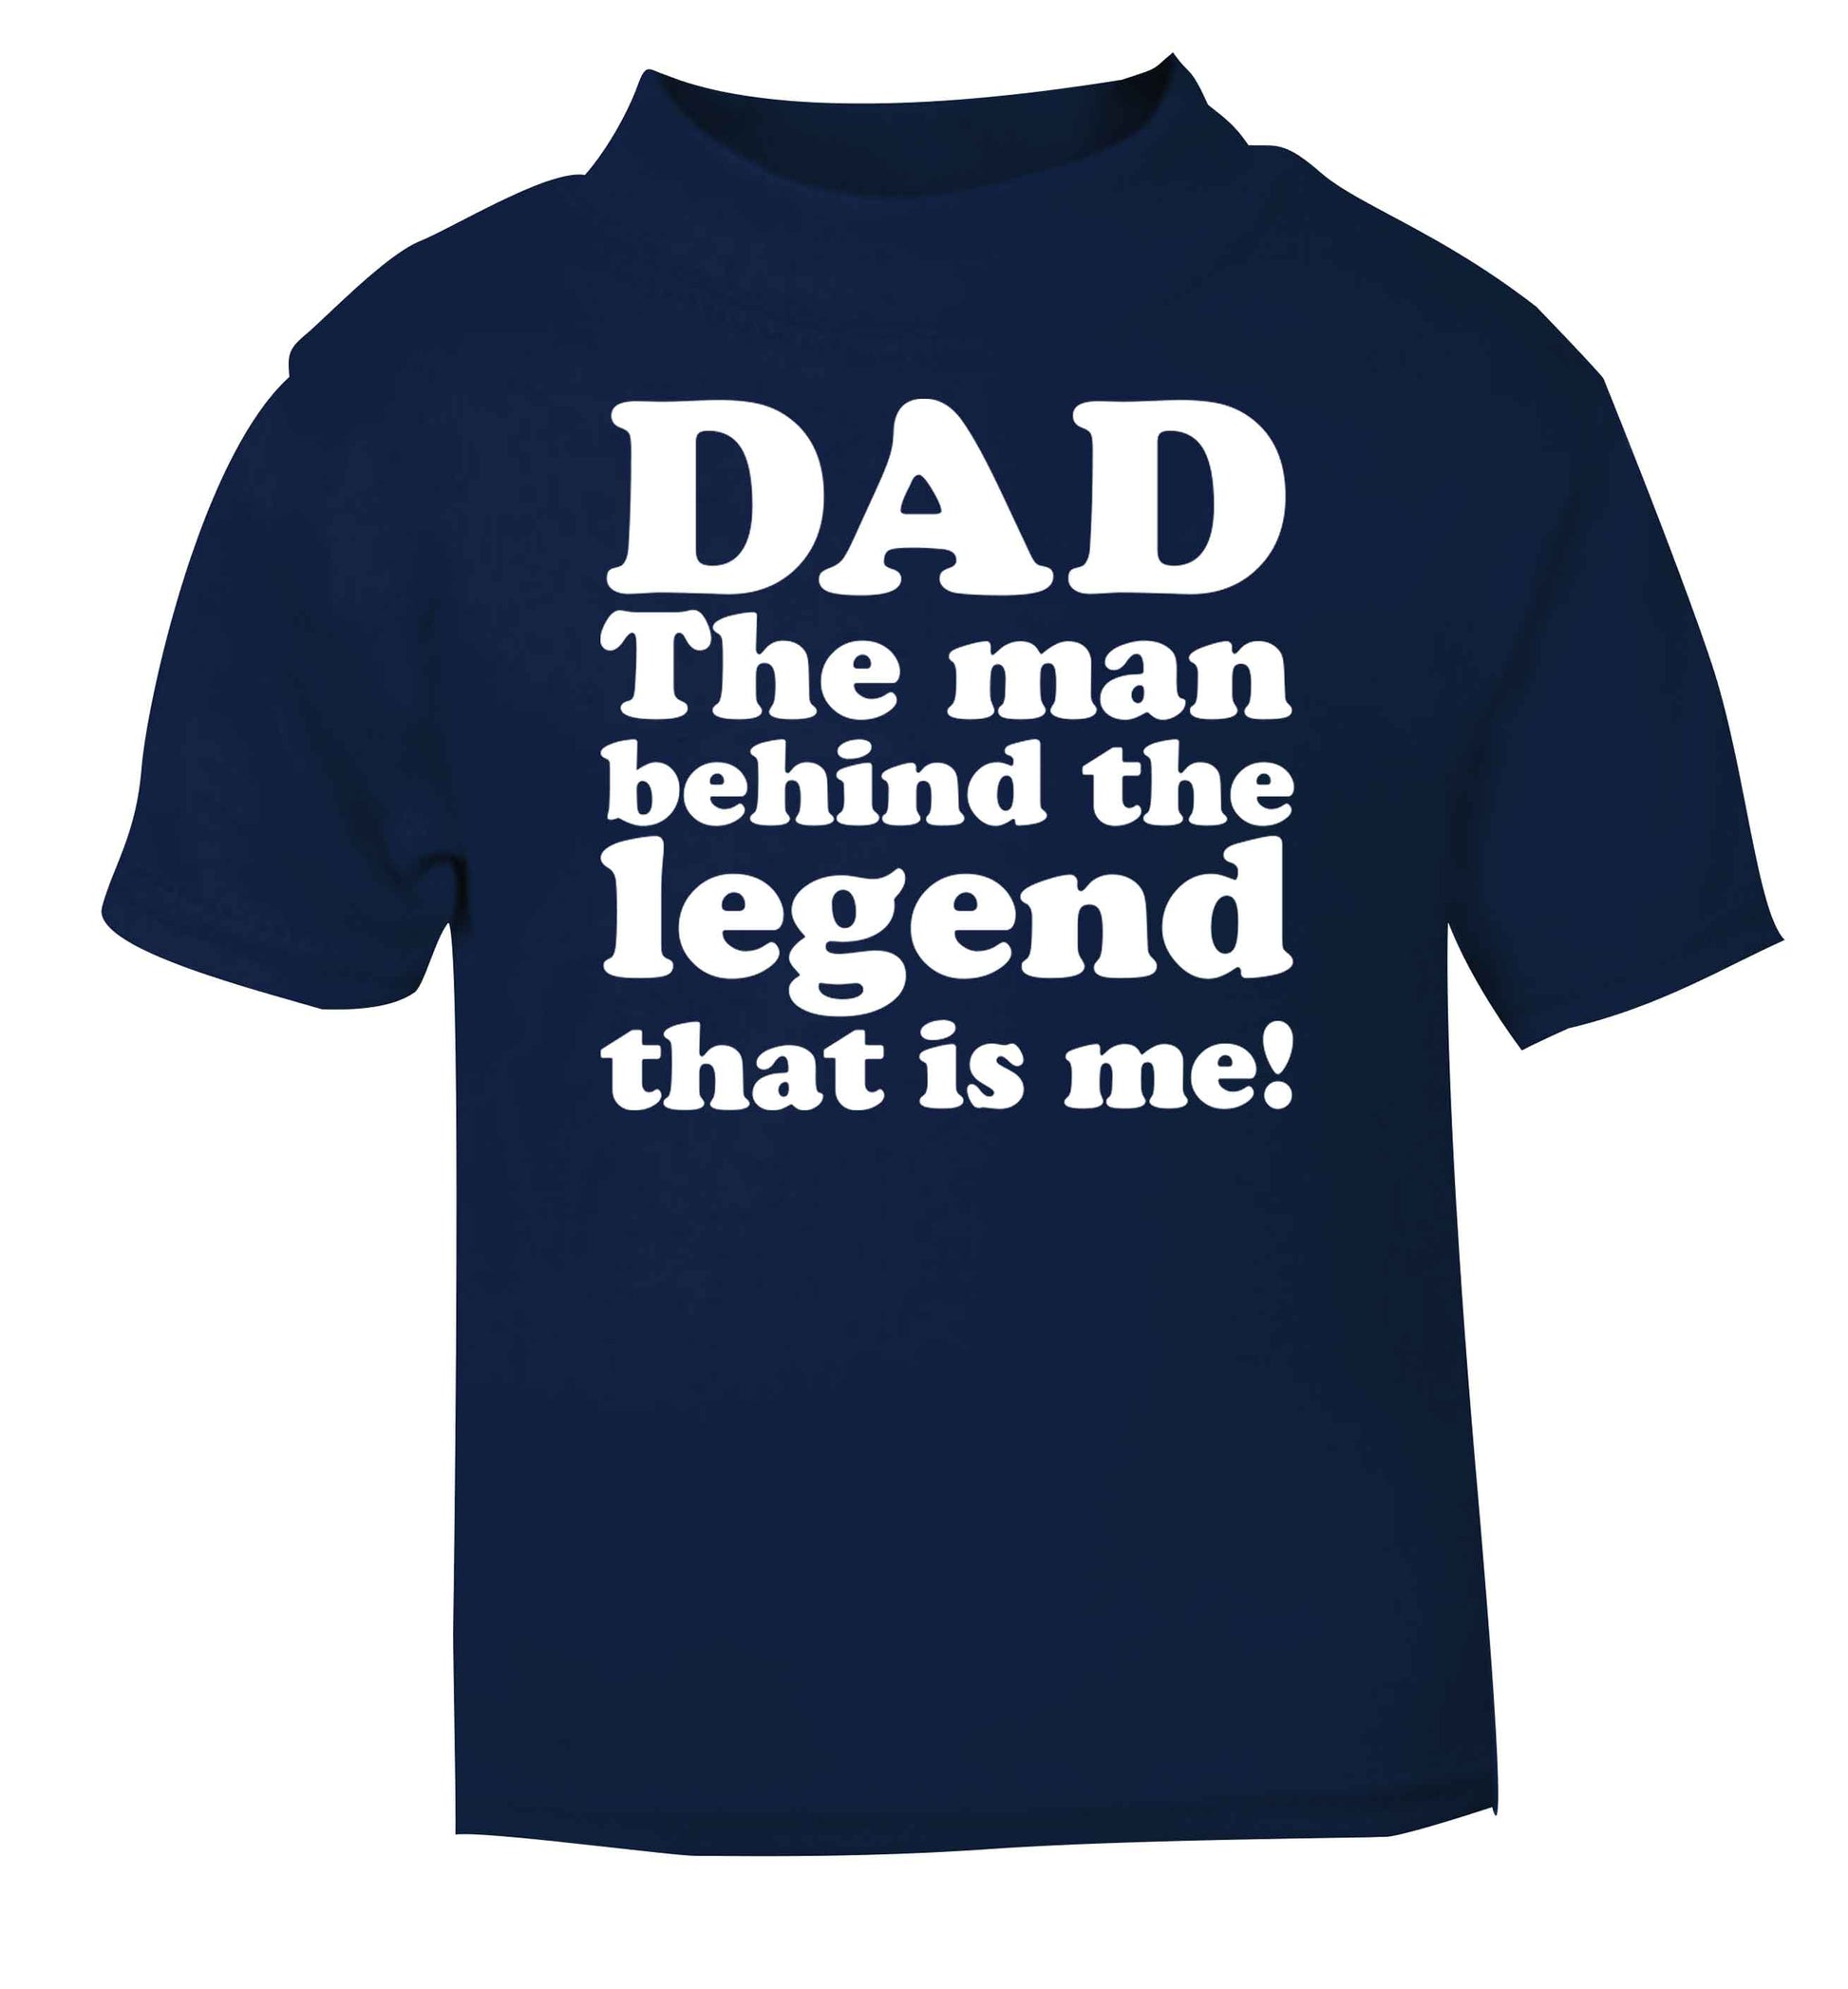 Dad the man behind the legend that is me navy baby toddler Tshirt 2 Years